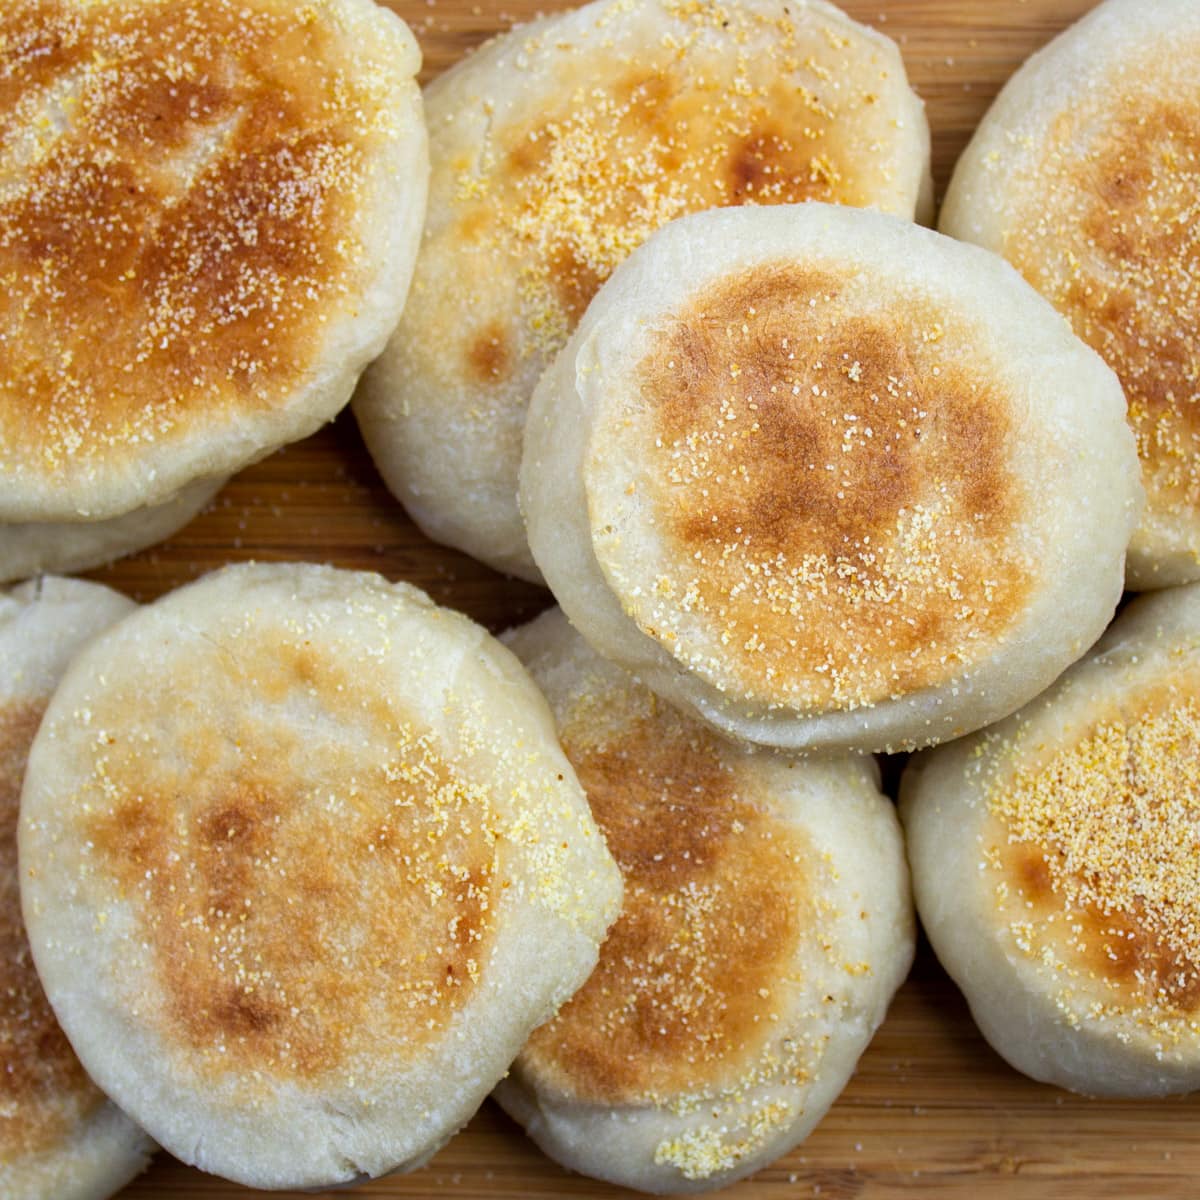 pile of english muffins on cutting board.